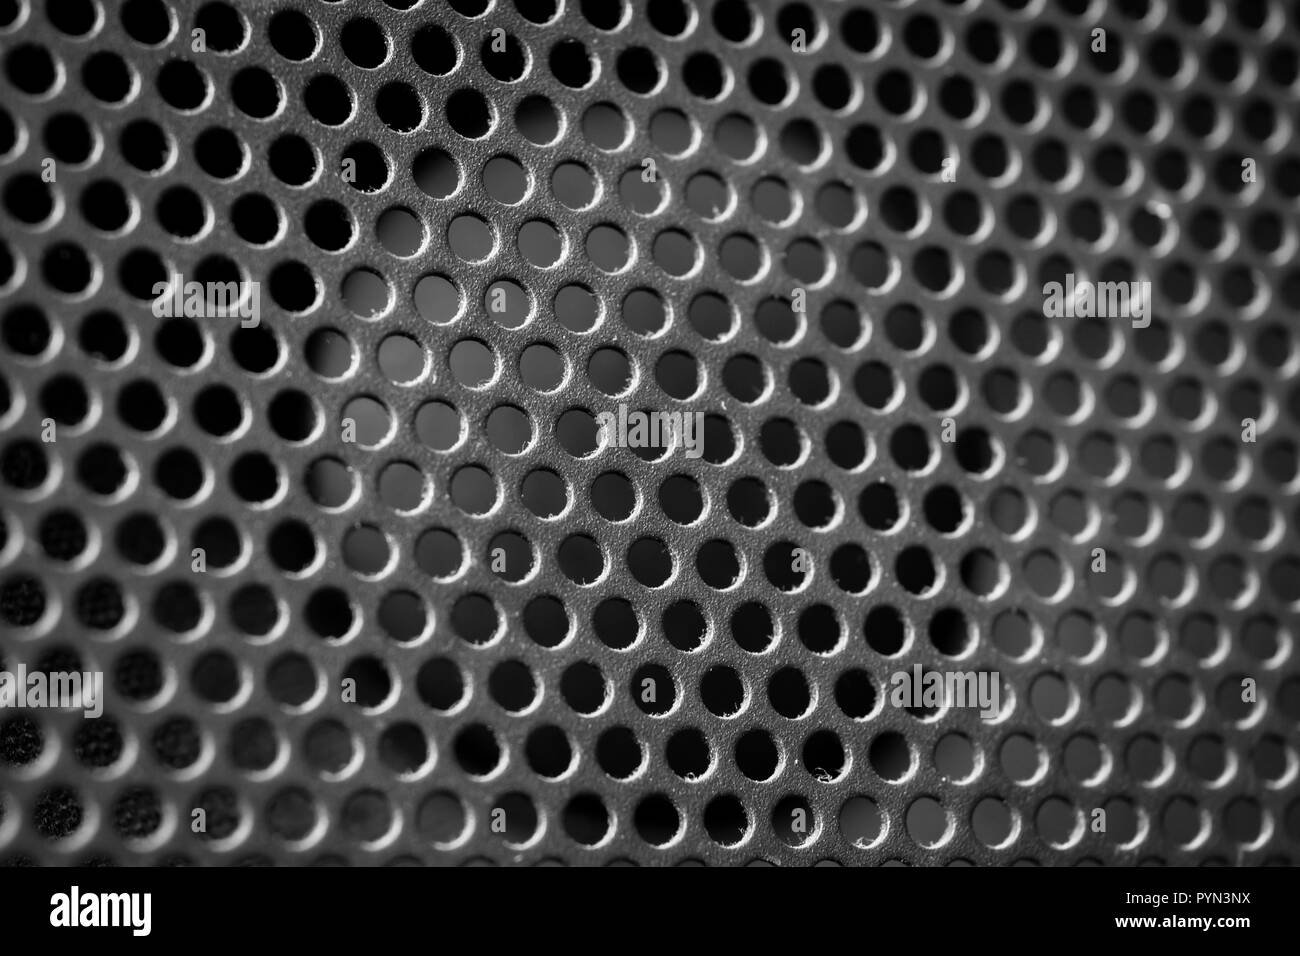 Audio Speaker Mesh Grille and sub speaker driver in backgroung Stock Photo